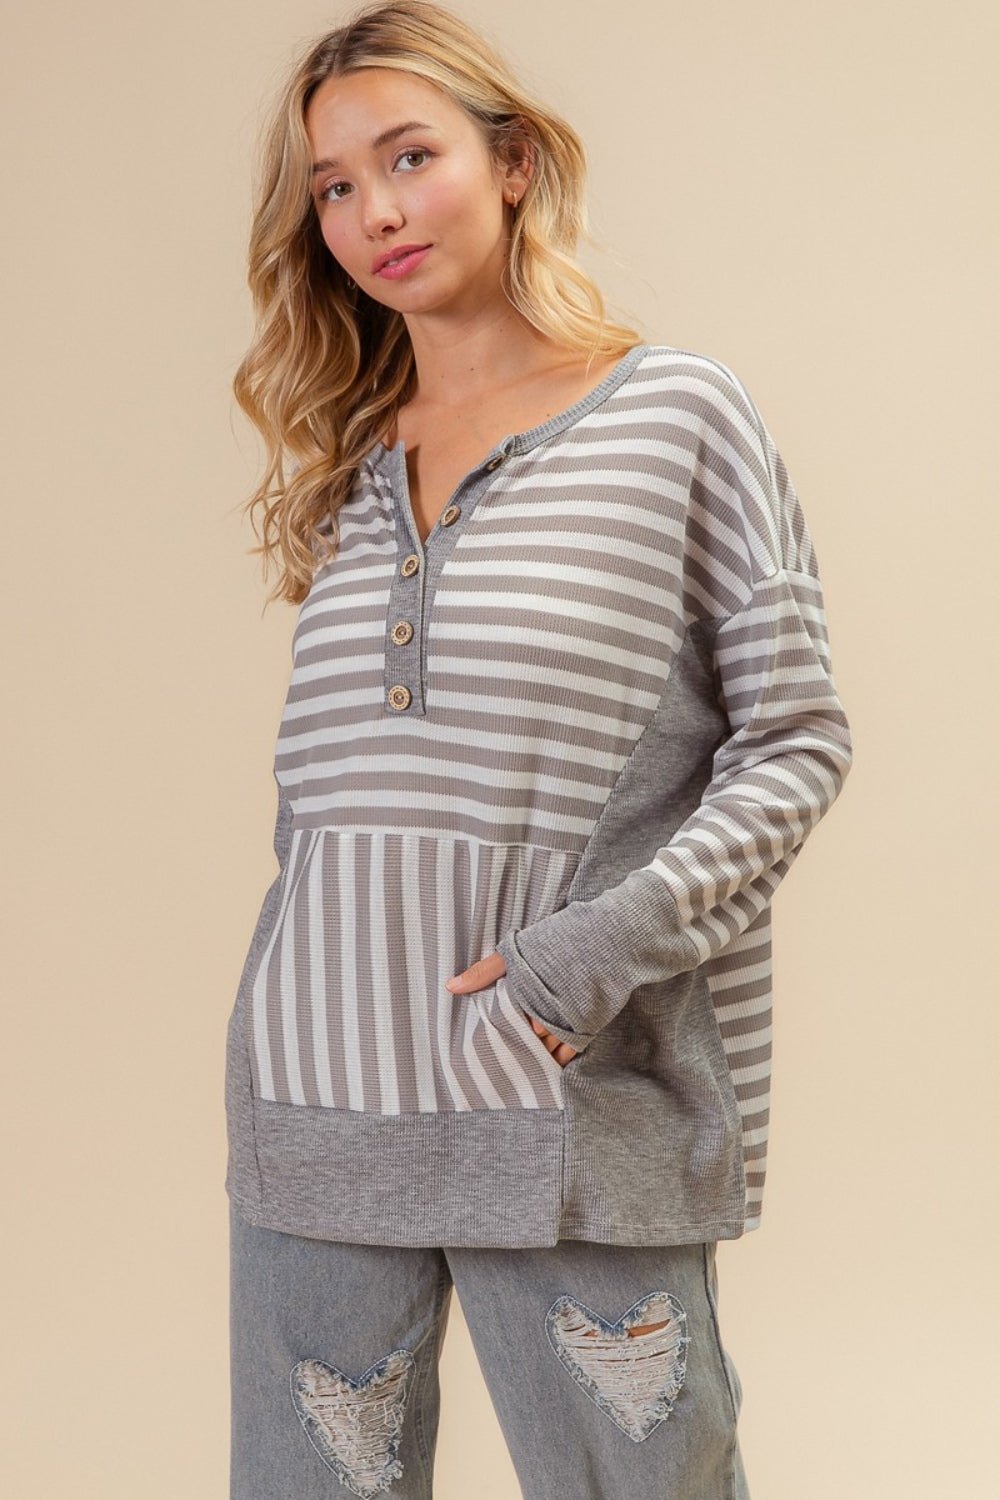 BiBi Striped Thumbhole Long Sleeve Top - Happily Ever Atchison Shop Co.